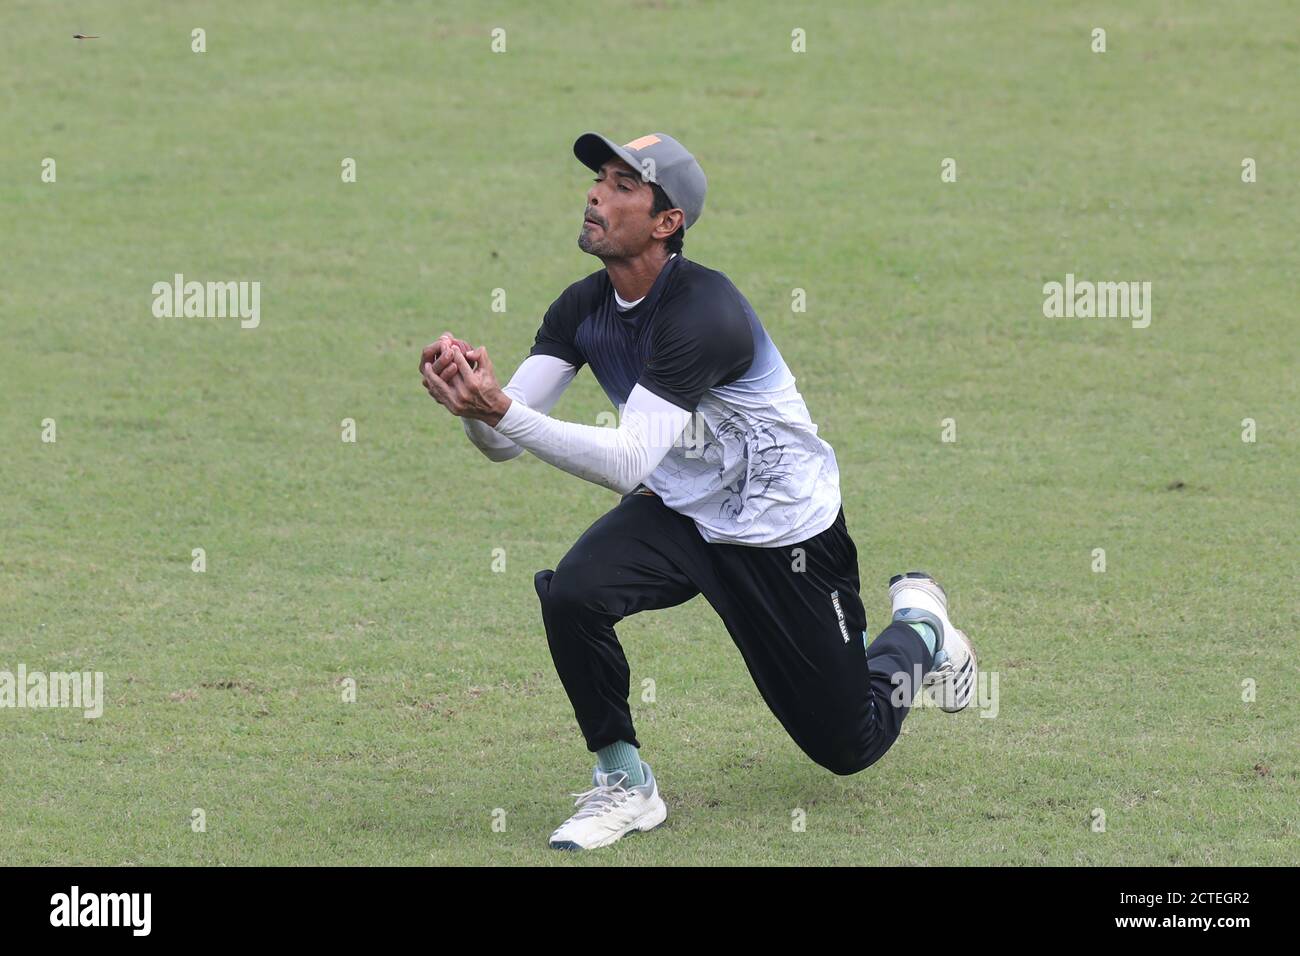 Dhaka, Bangladesh. 22nd Sep, 2020. Bangladesh National Cricket Team Player Mahmudullah in action during practice session at Sher-e-Bangla National Cricket Stadium.Bangladesh is likely to play two tests in Kandy and the third in Colombo, with the side tour Sri Lanka this month. A tentative fixture has been chalked by the Bangladesh Cricket Board and Sri Lanka Cricket which will be revealed ahead of the series. Credit: SOPA Images Limited/Alamy Live News Stock Photo